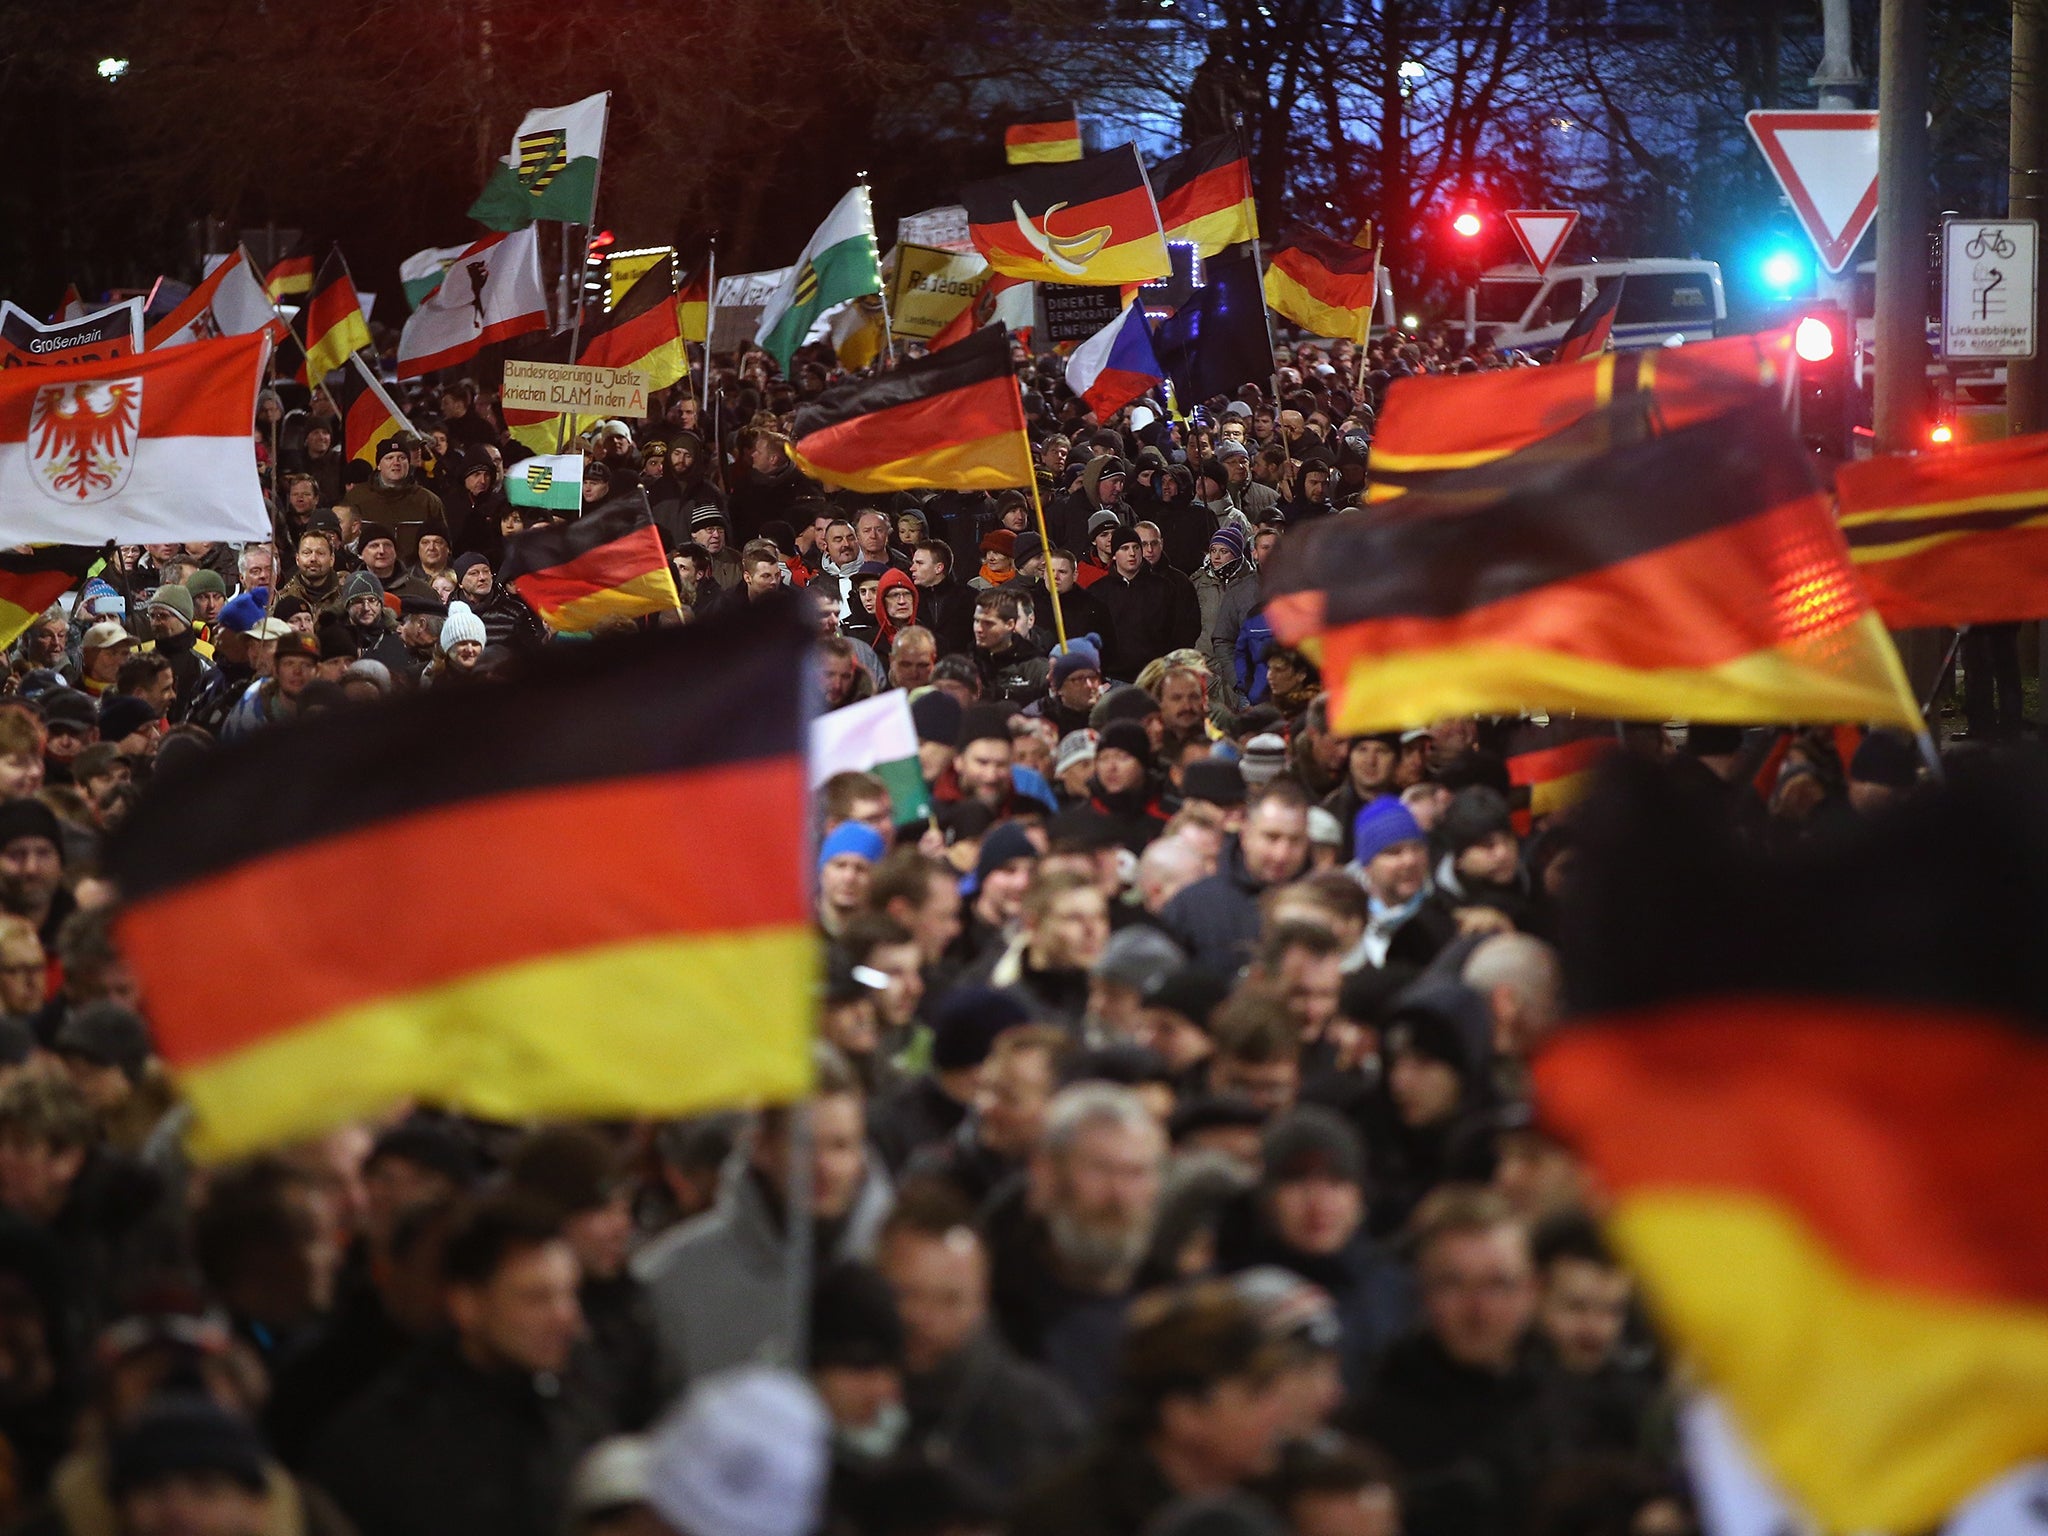 Supporters of the Pegida movement wave German and other flags